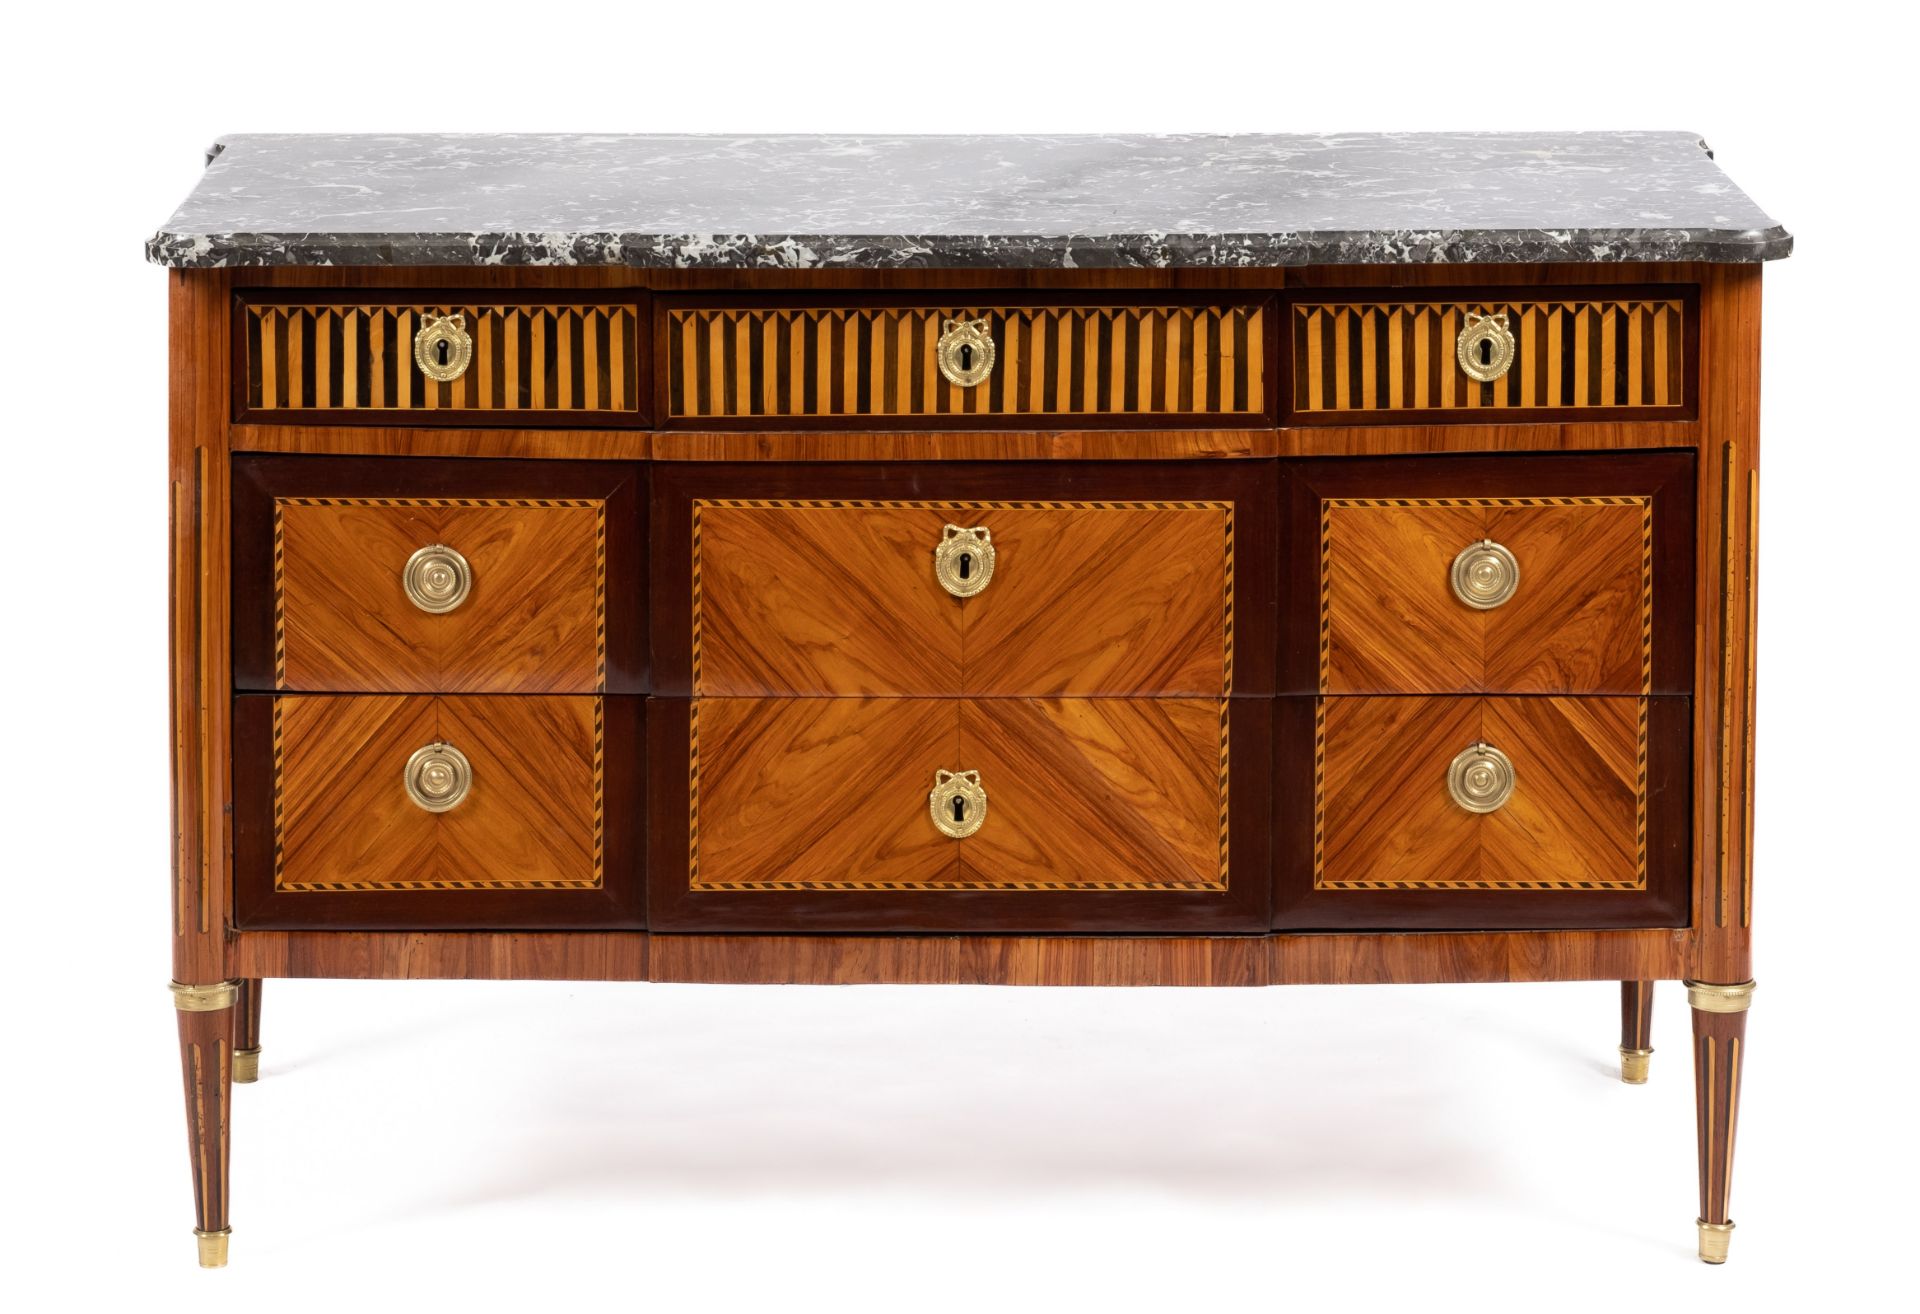 A Louis XVI ormolu-mounted tulipwood, amaranth and fruitwood marquetry commode - Image 2 of 4